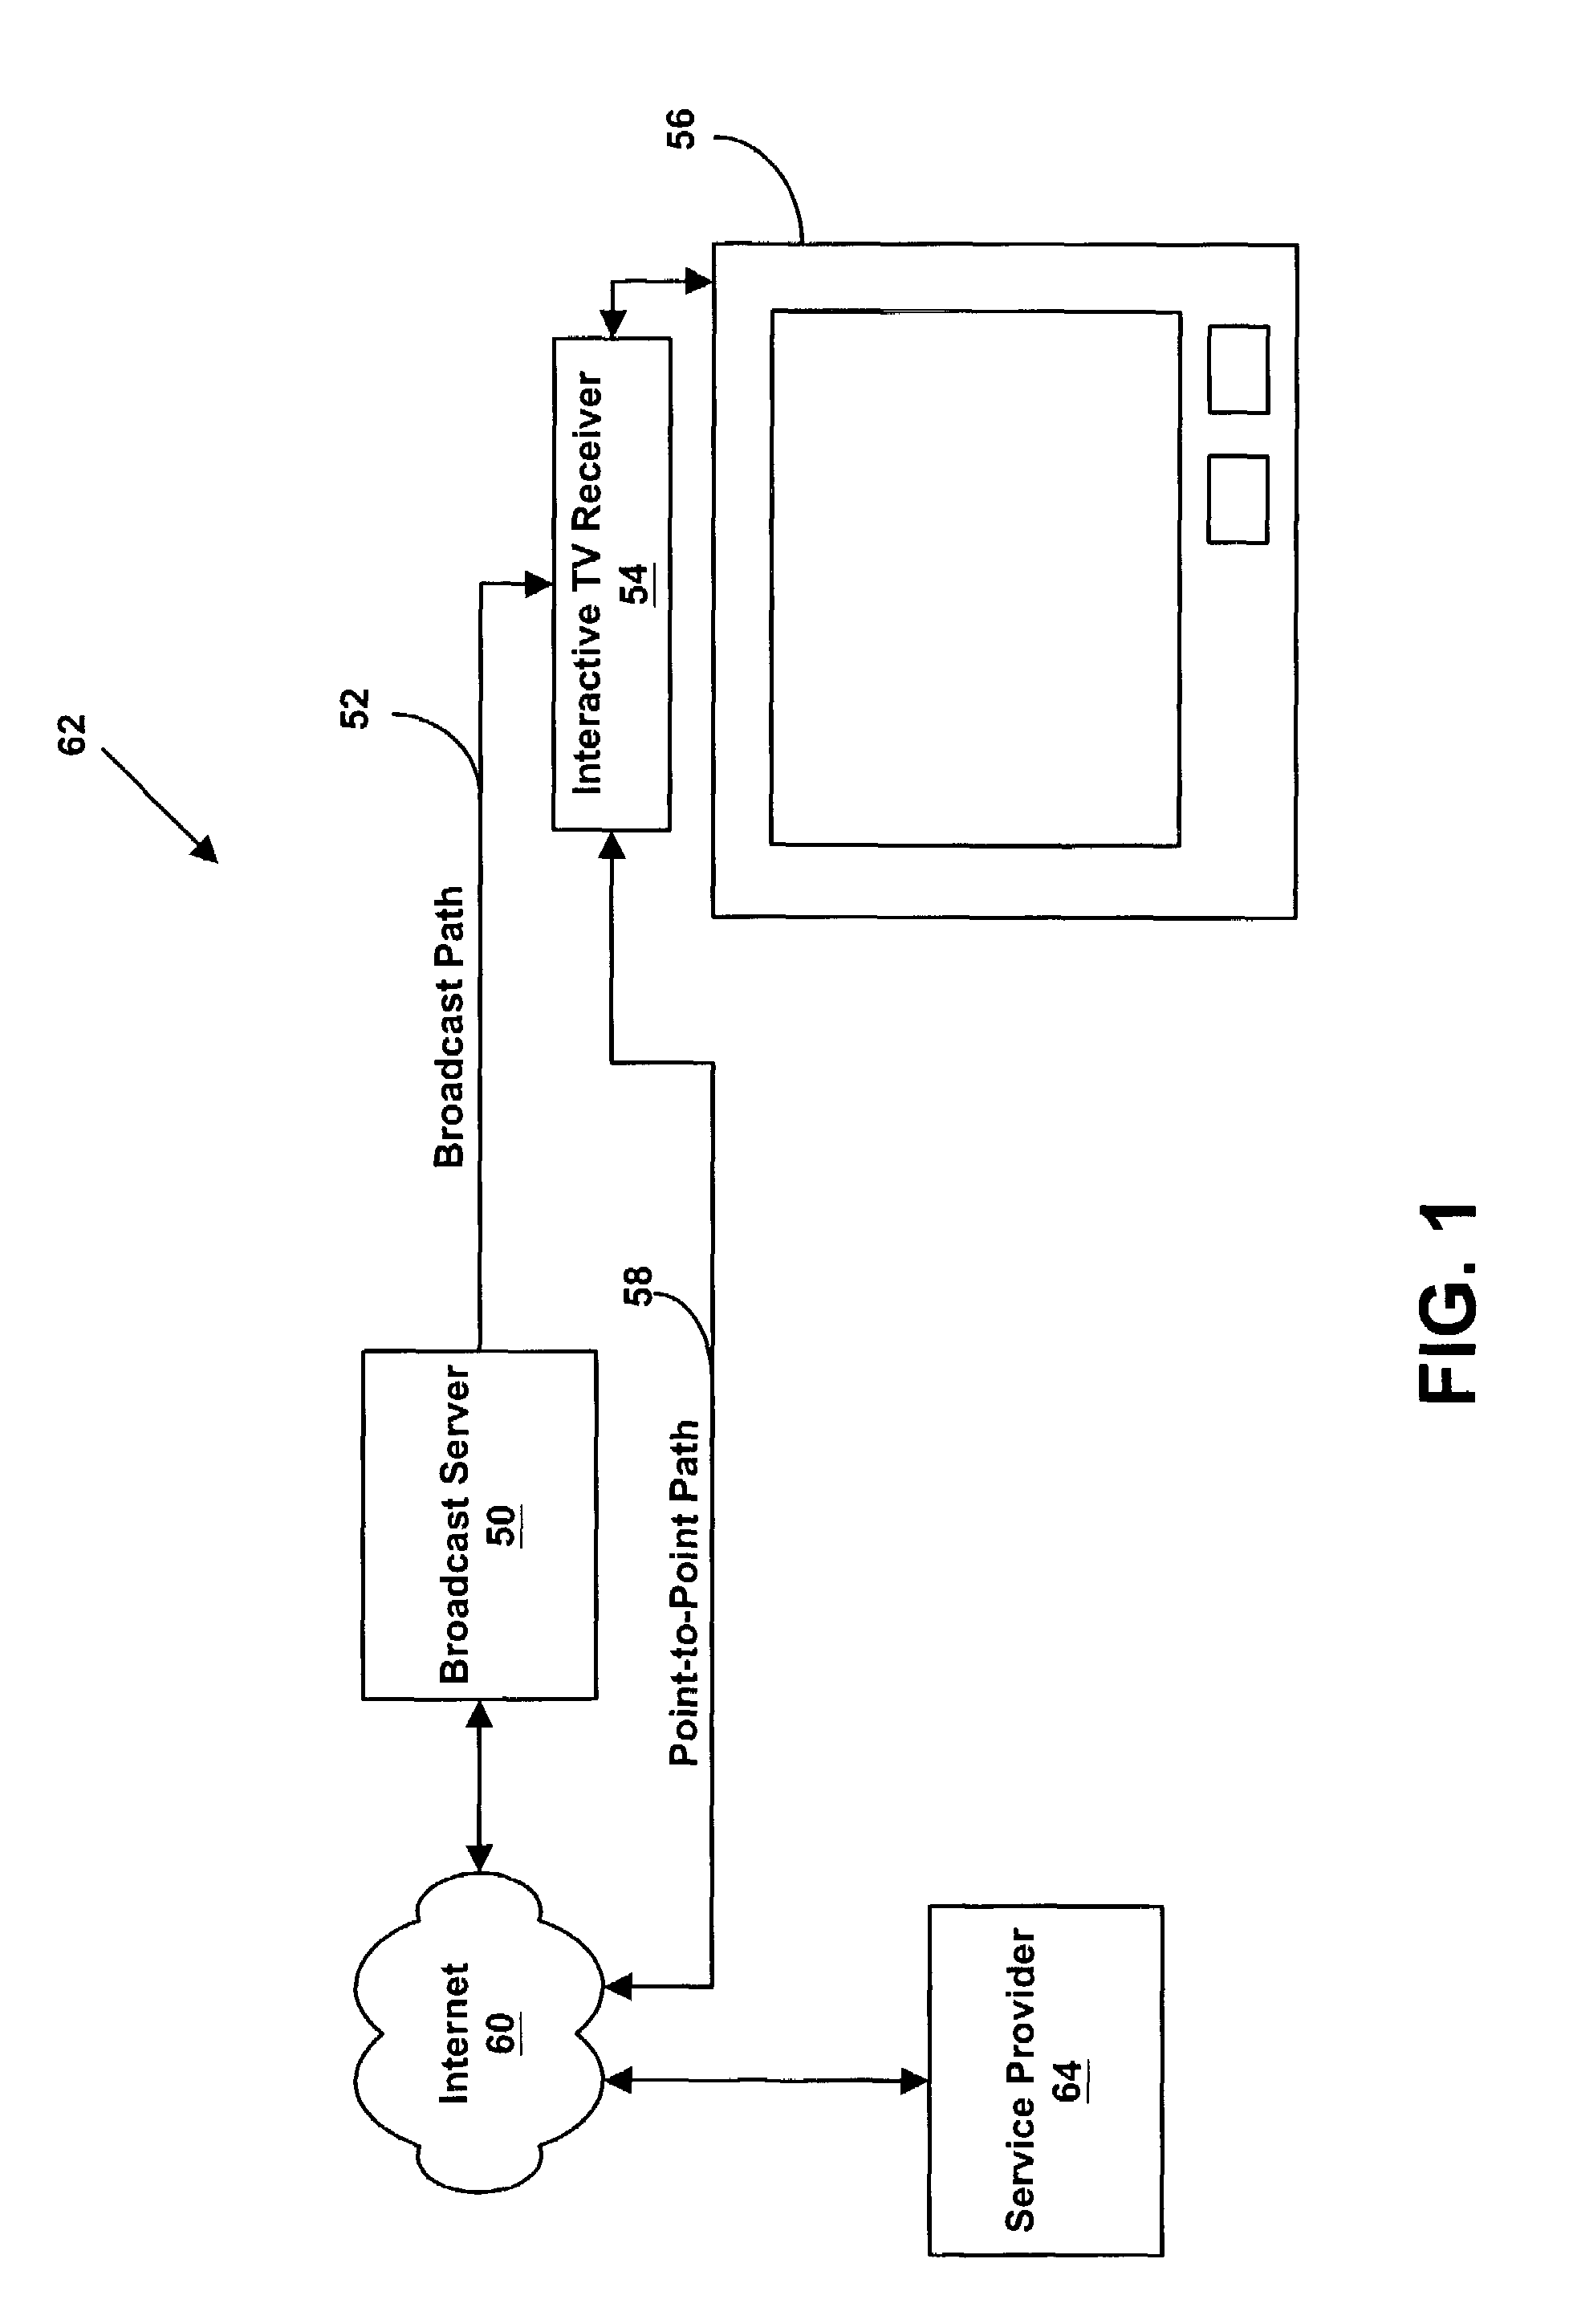 Method and system for emulating and HTTP server through a broadcast carousel